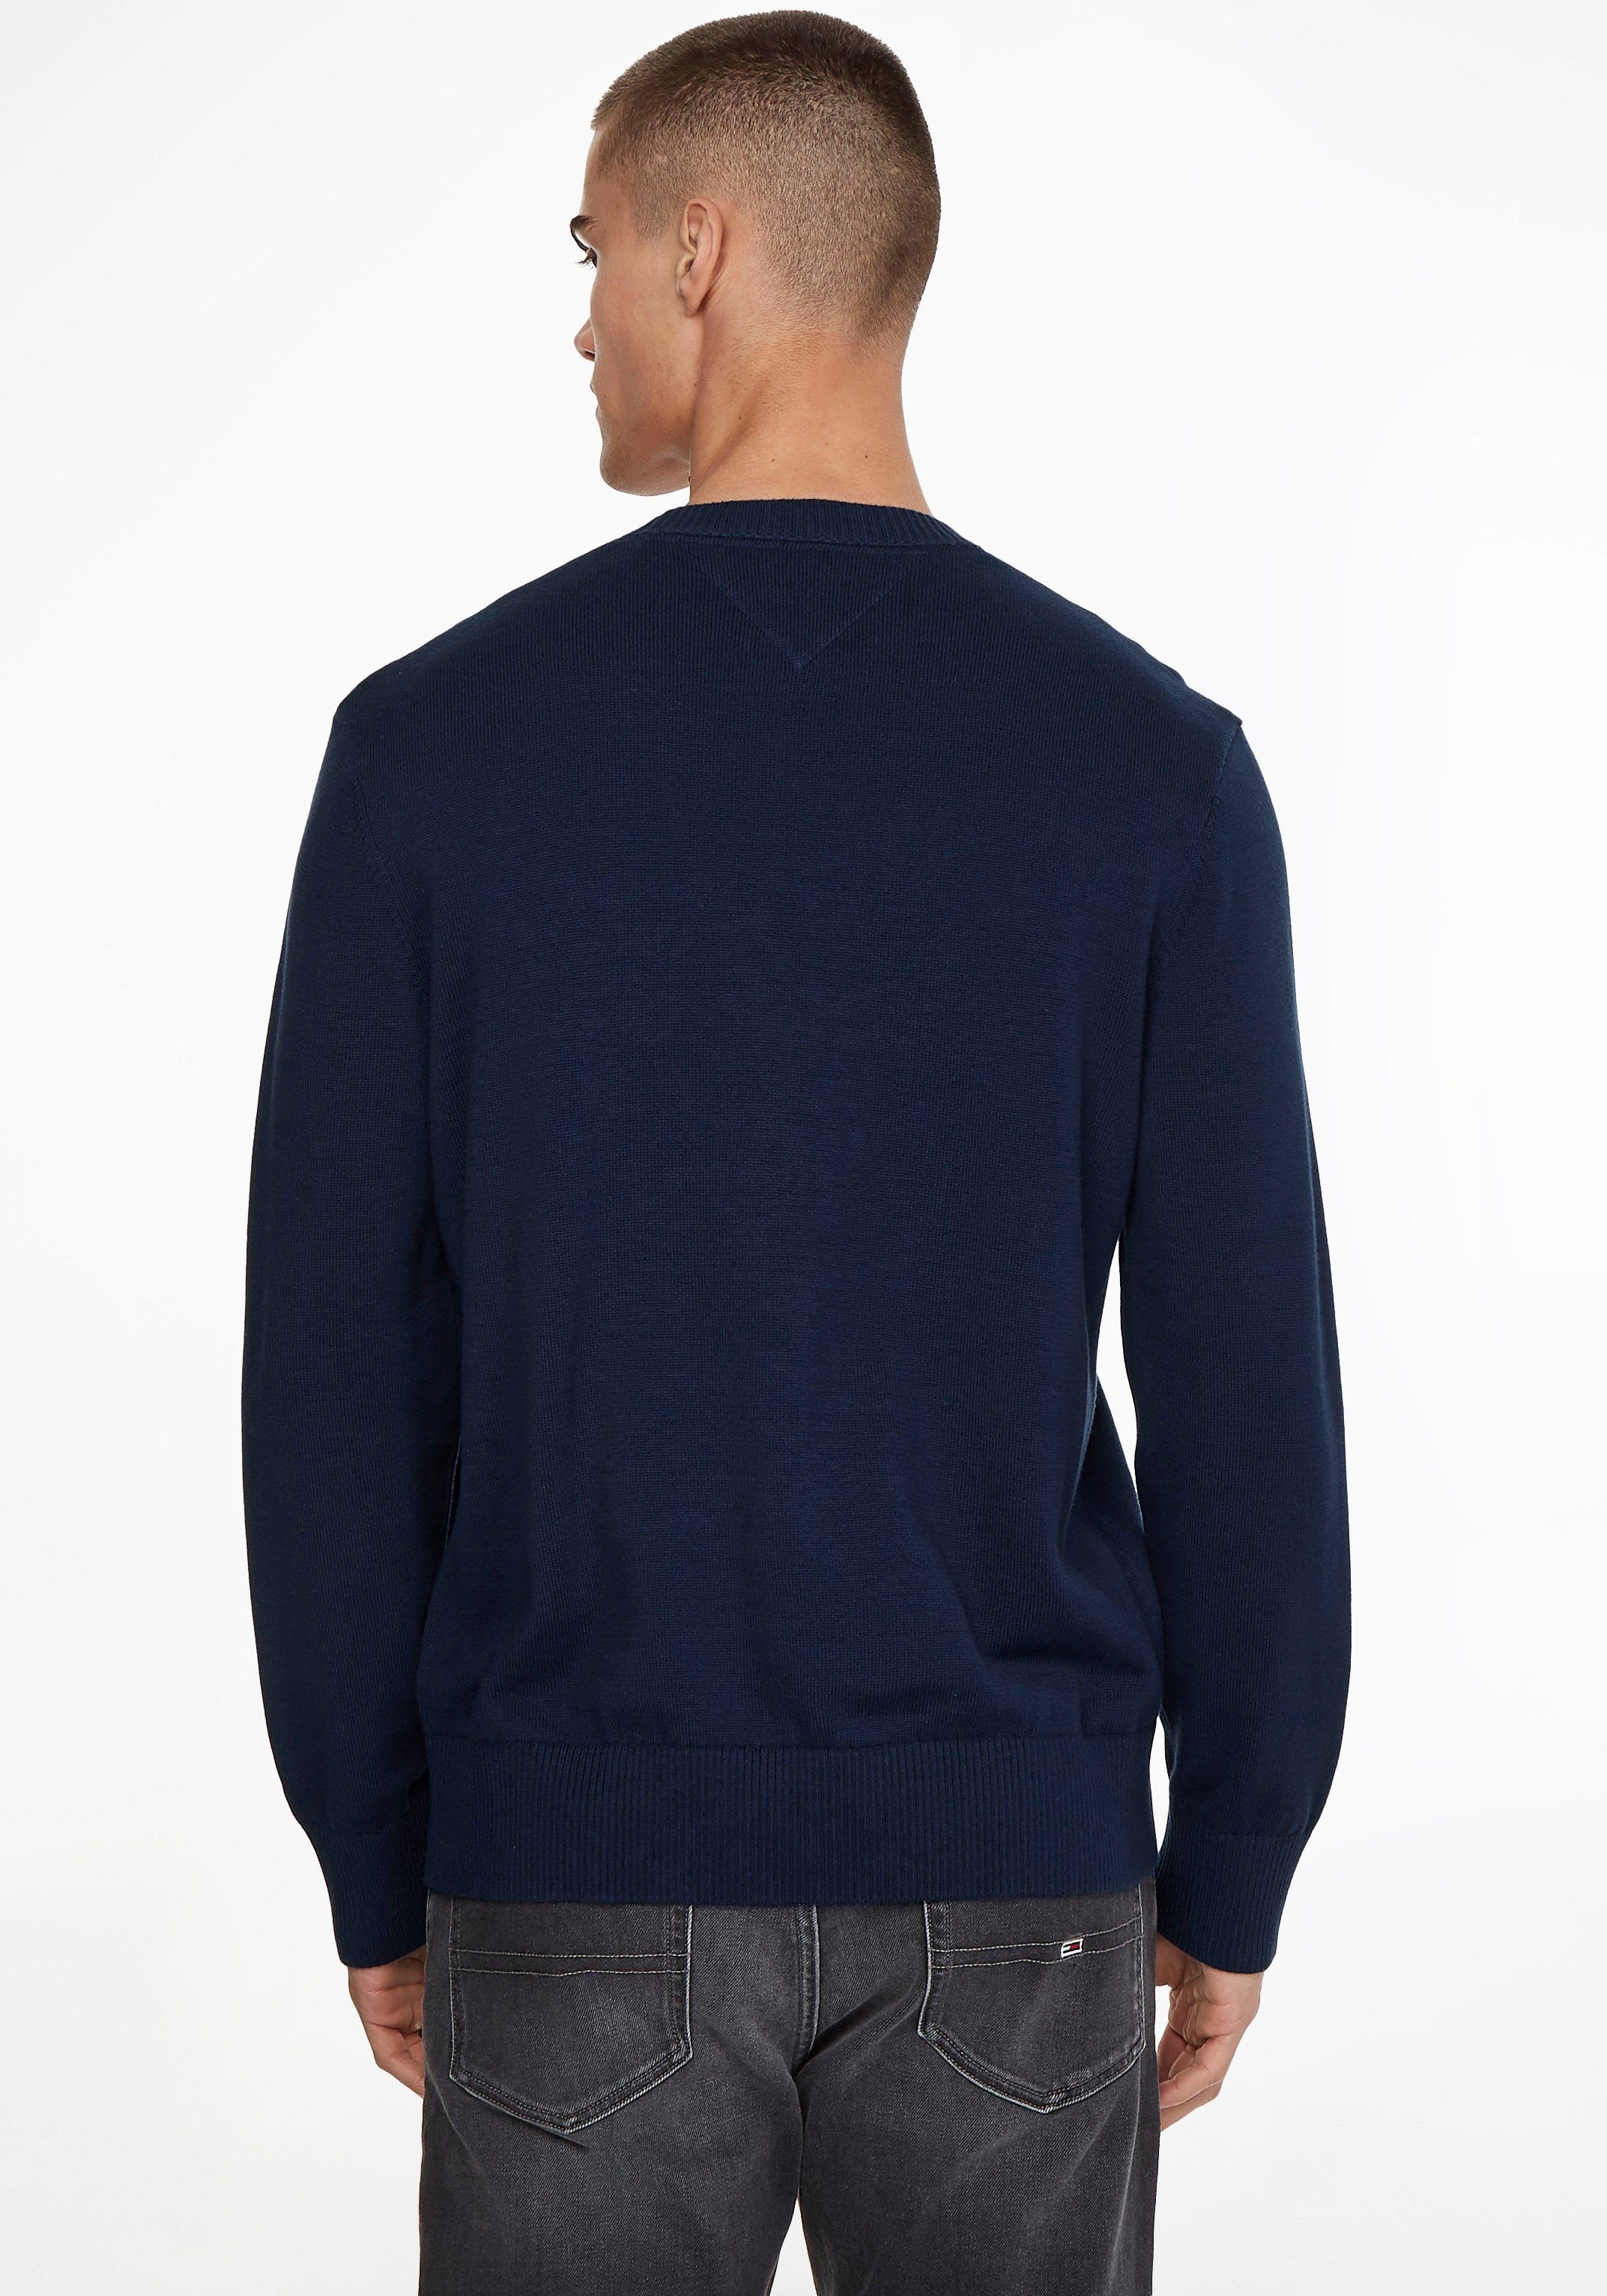 Strickpullover Jeans Tommy Twilight Navy TOMMY TAPE TJM SWEATER